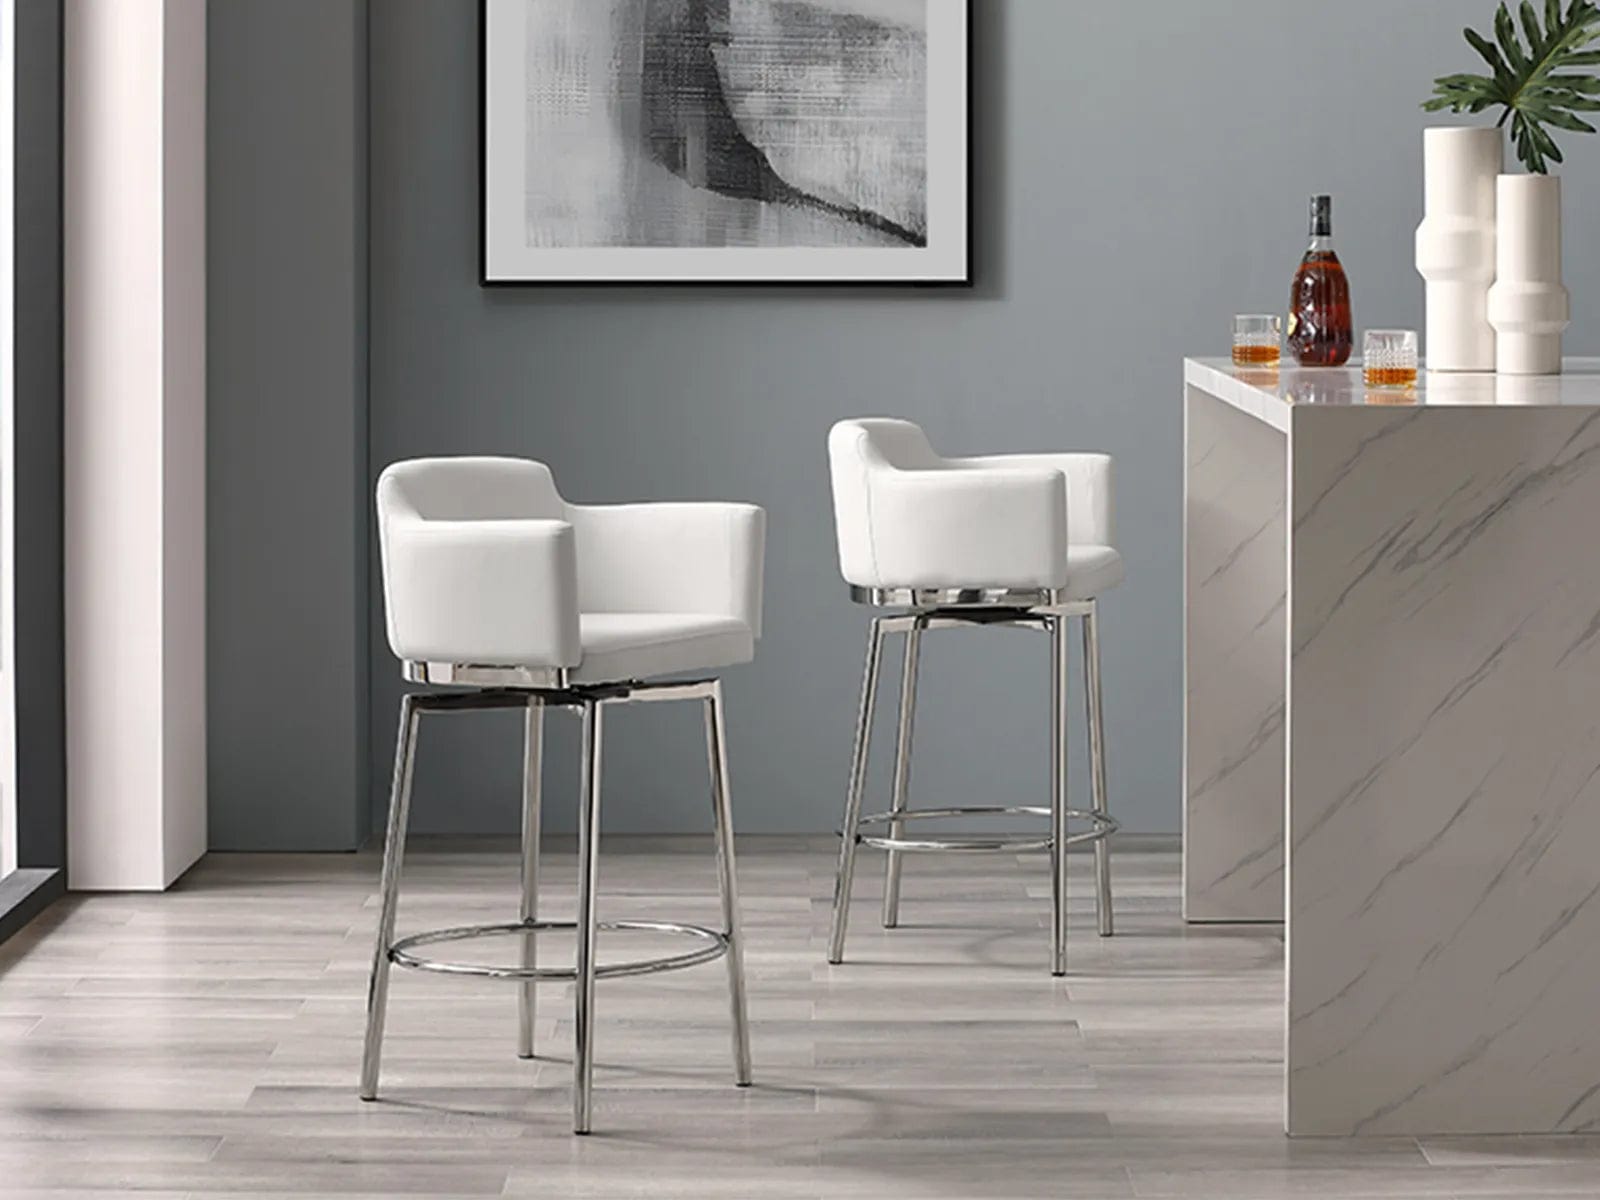 CB-951WHB | Suzzie Counter Height Bar Stool White